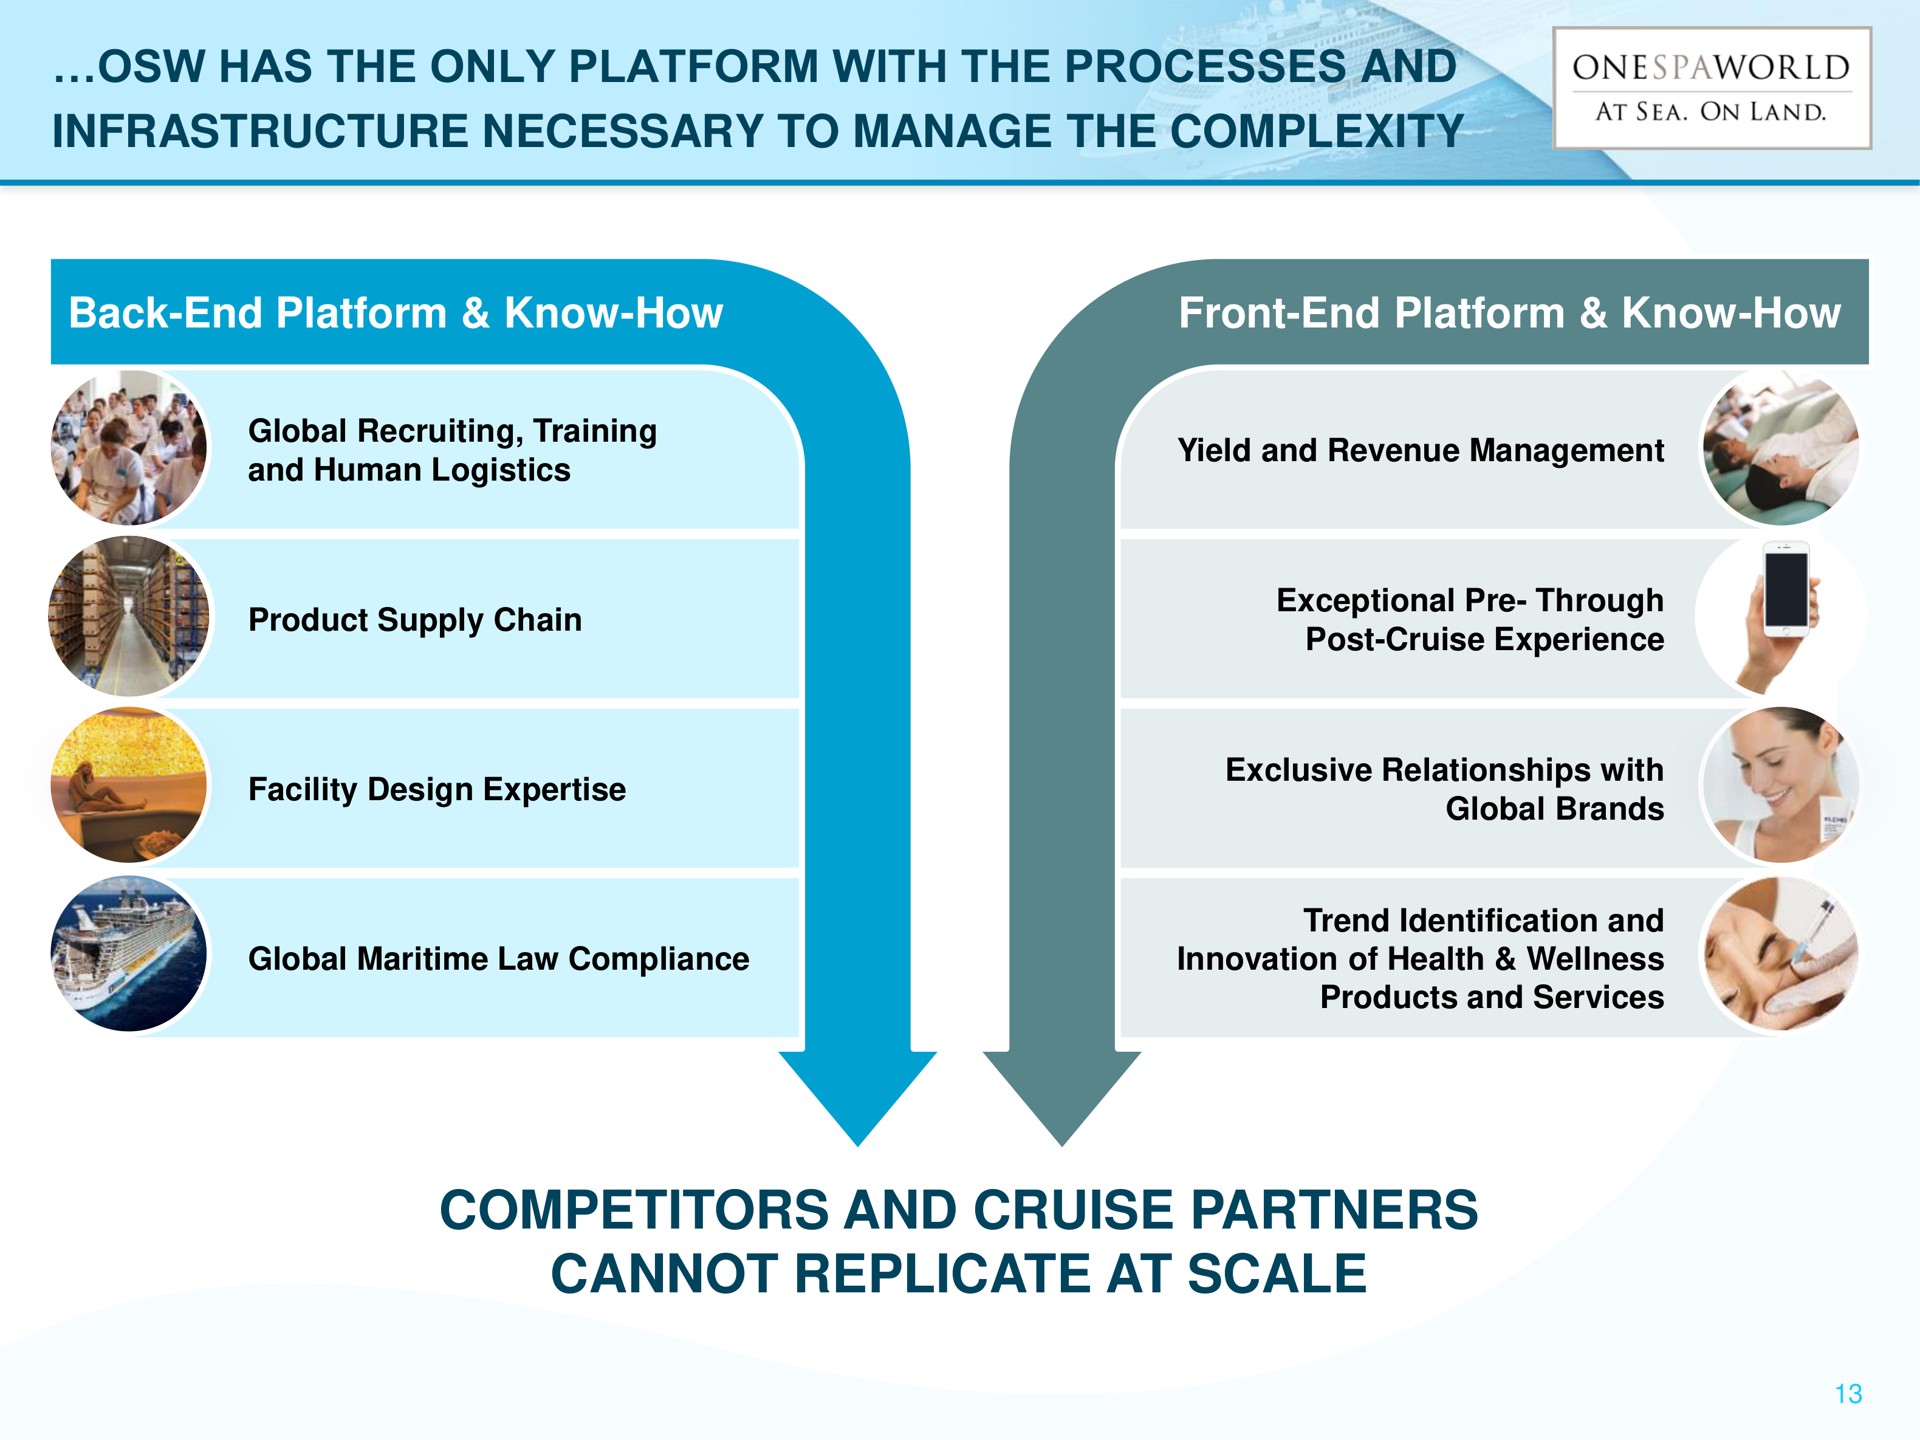 has the only platform with the processes and infrastructure necessary to manage the complexity back end platform know how front end platform know how competitors and cruise partners cannot replicate at scale | OnesSpaWorld